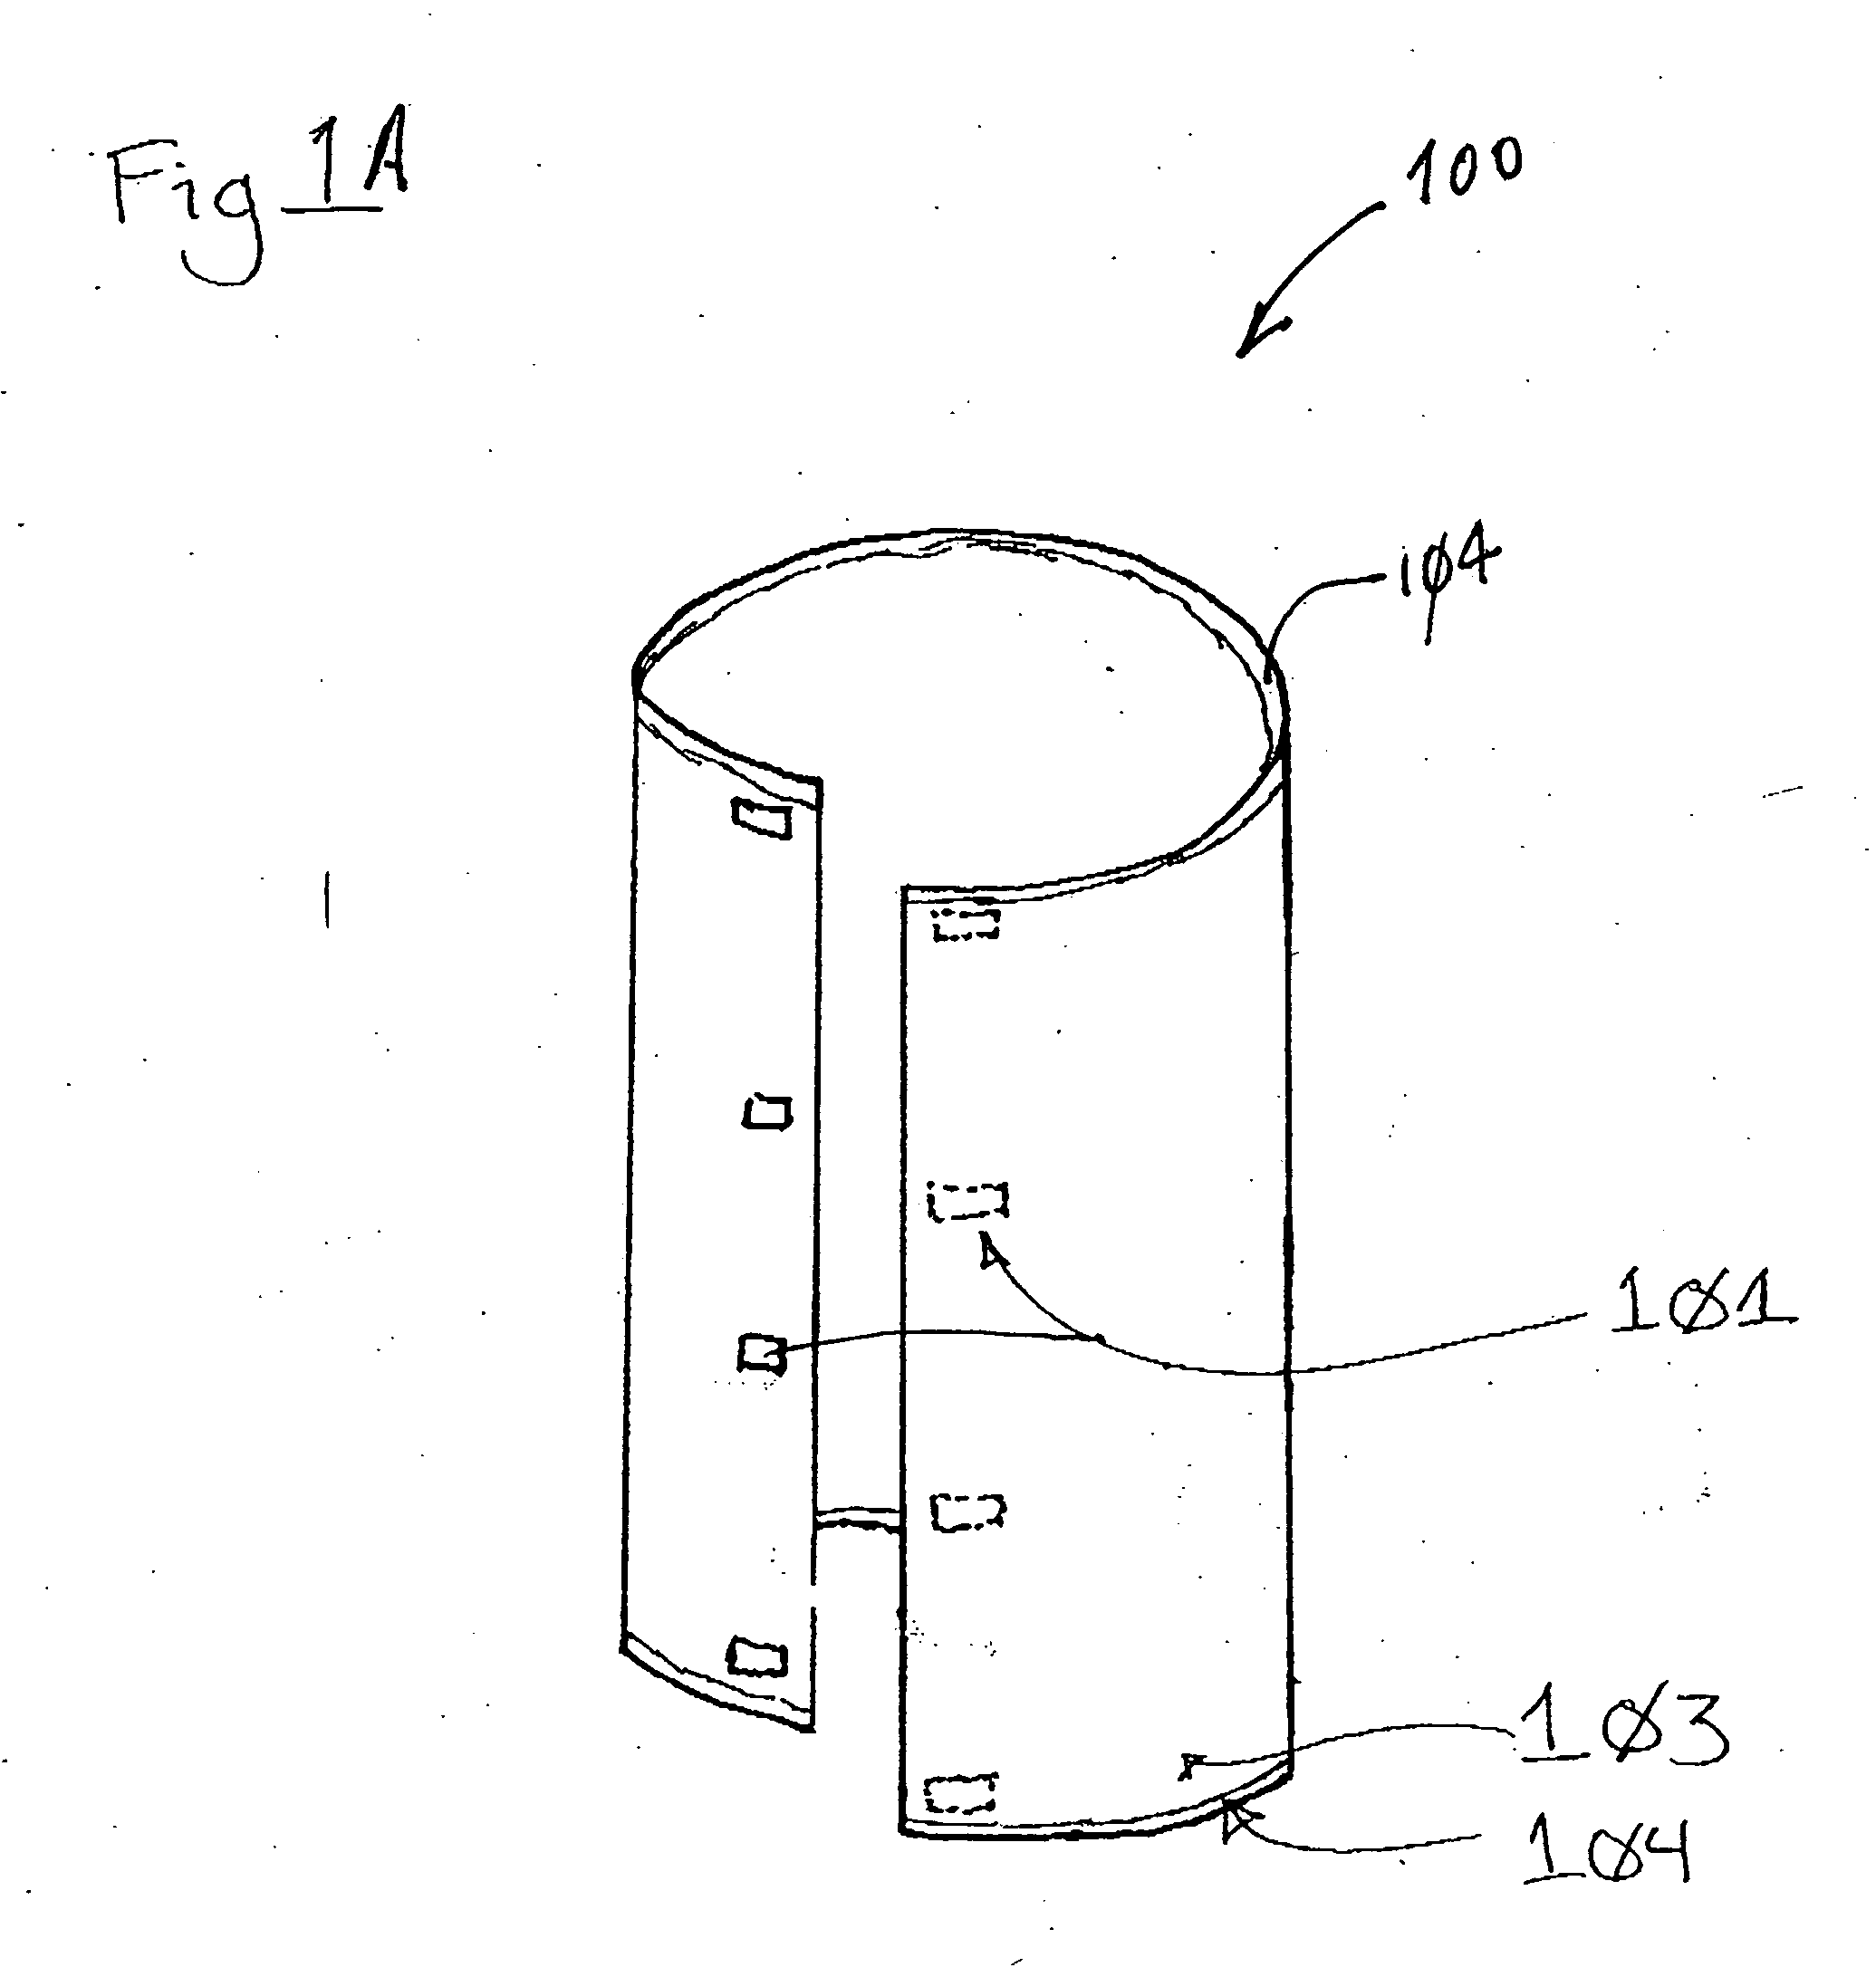 Insulating/protective covering for a container